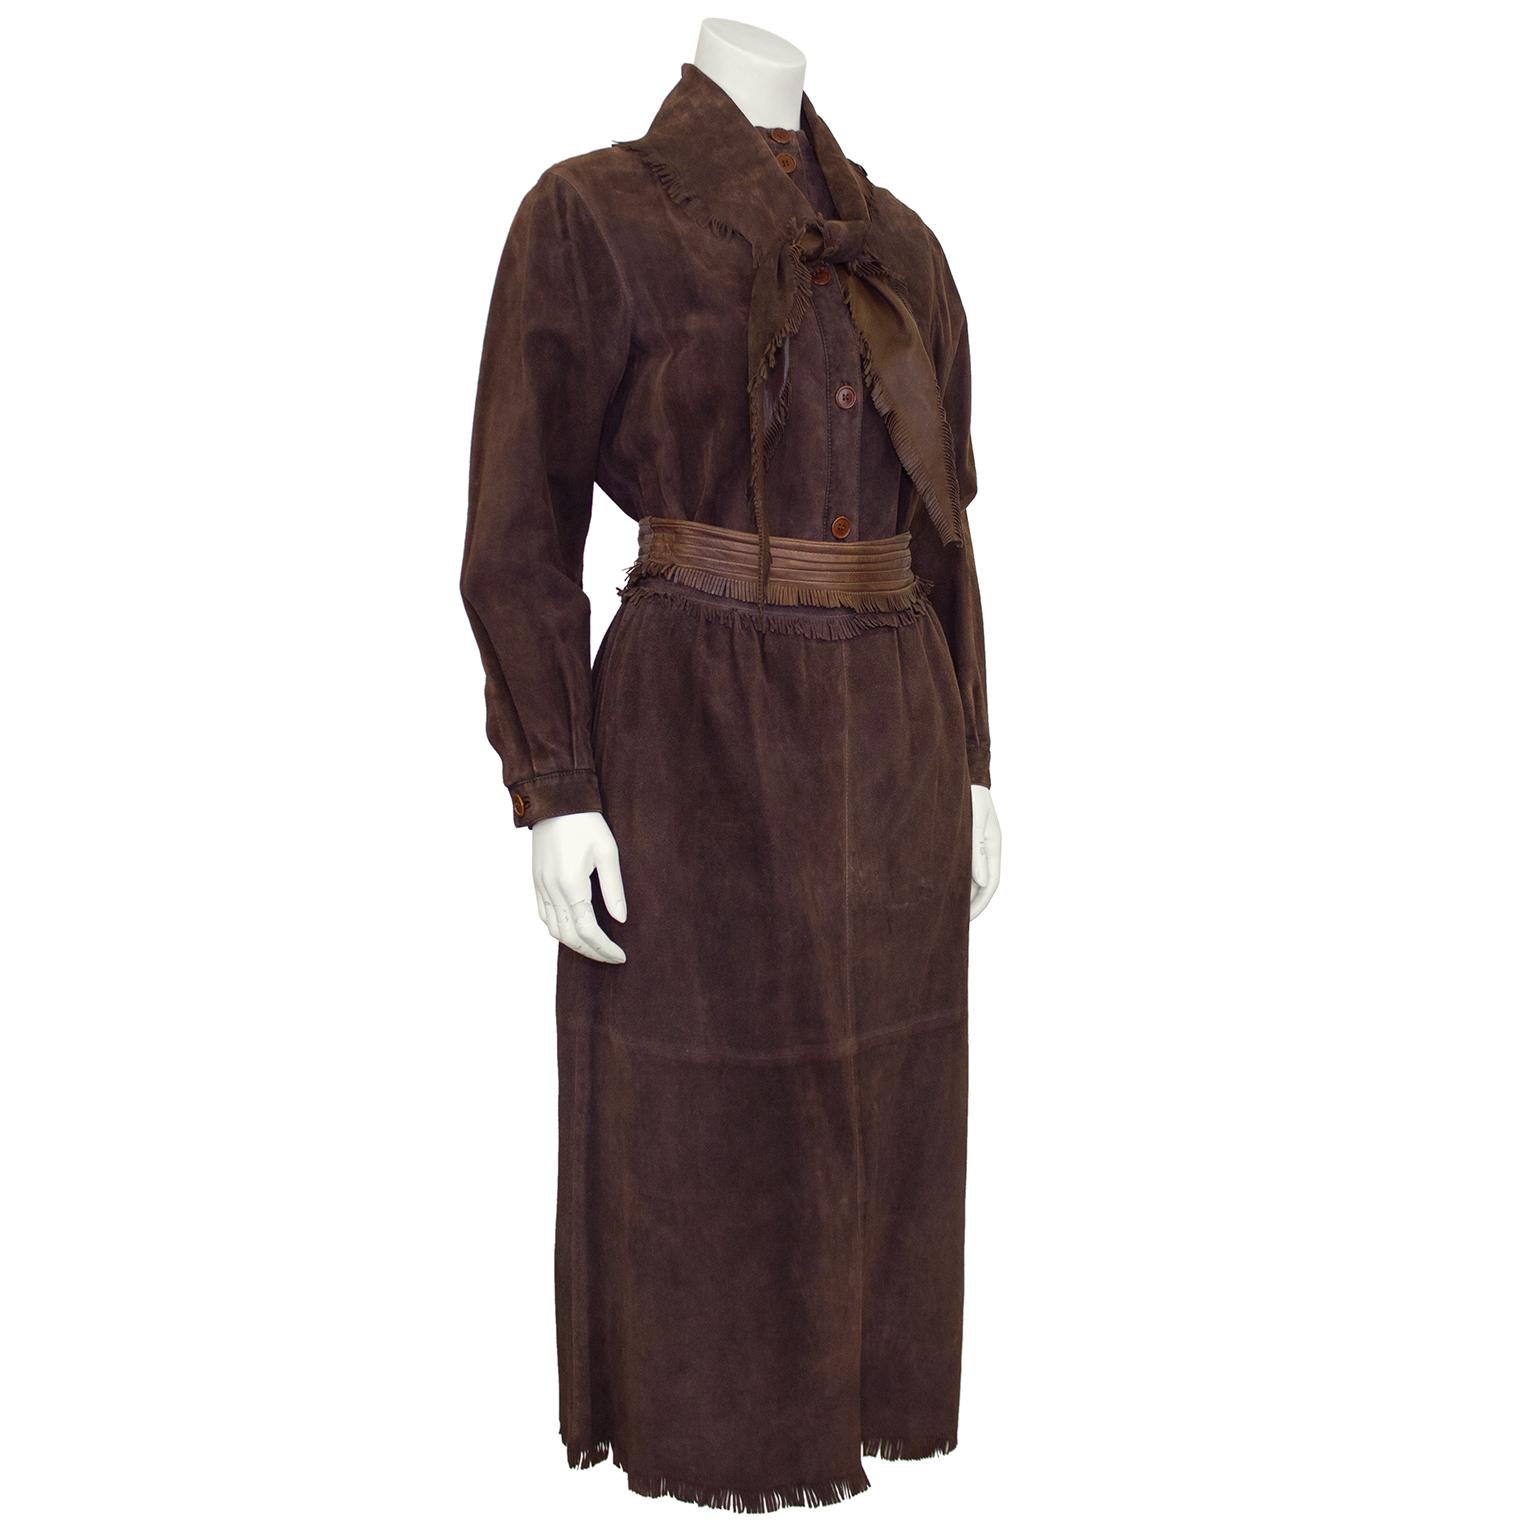 A beautiful butter soft brown suede and fringe Valentino ensemble from the 1980’s. Long button up shirt with a folded scarf collar that can be tied to your liking at the neck. High waisted midi length skirt with a contrasting brown leather ribbed